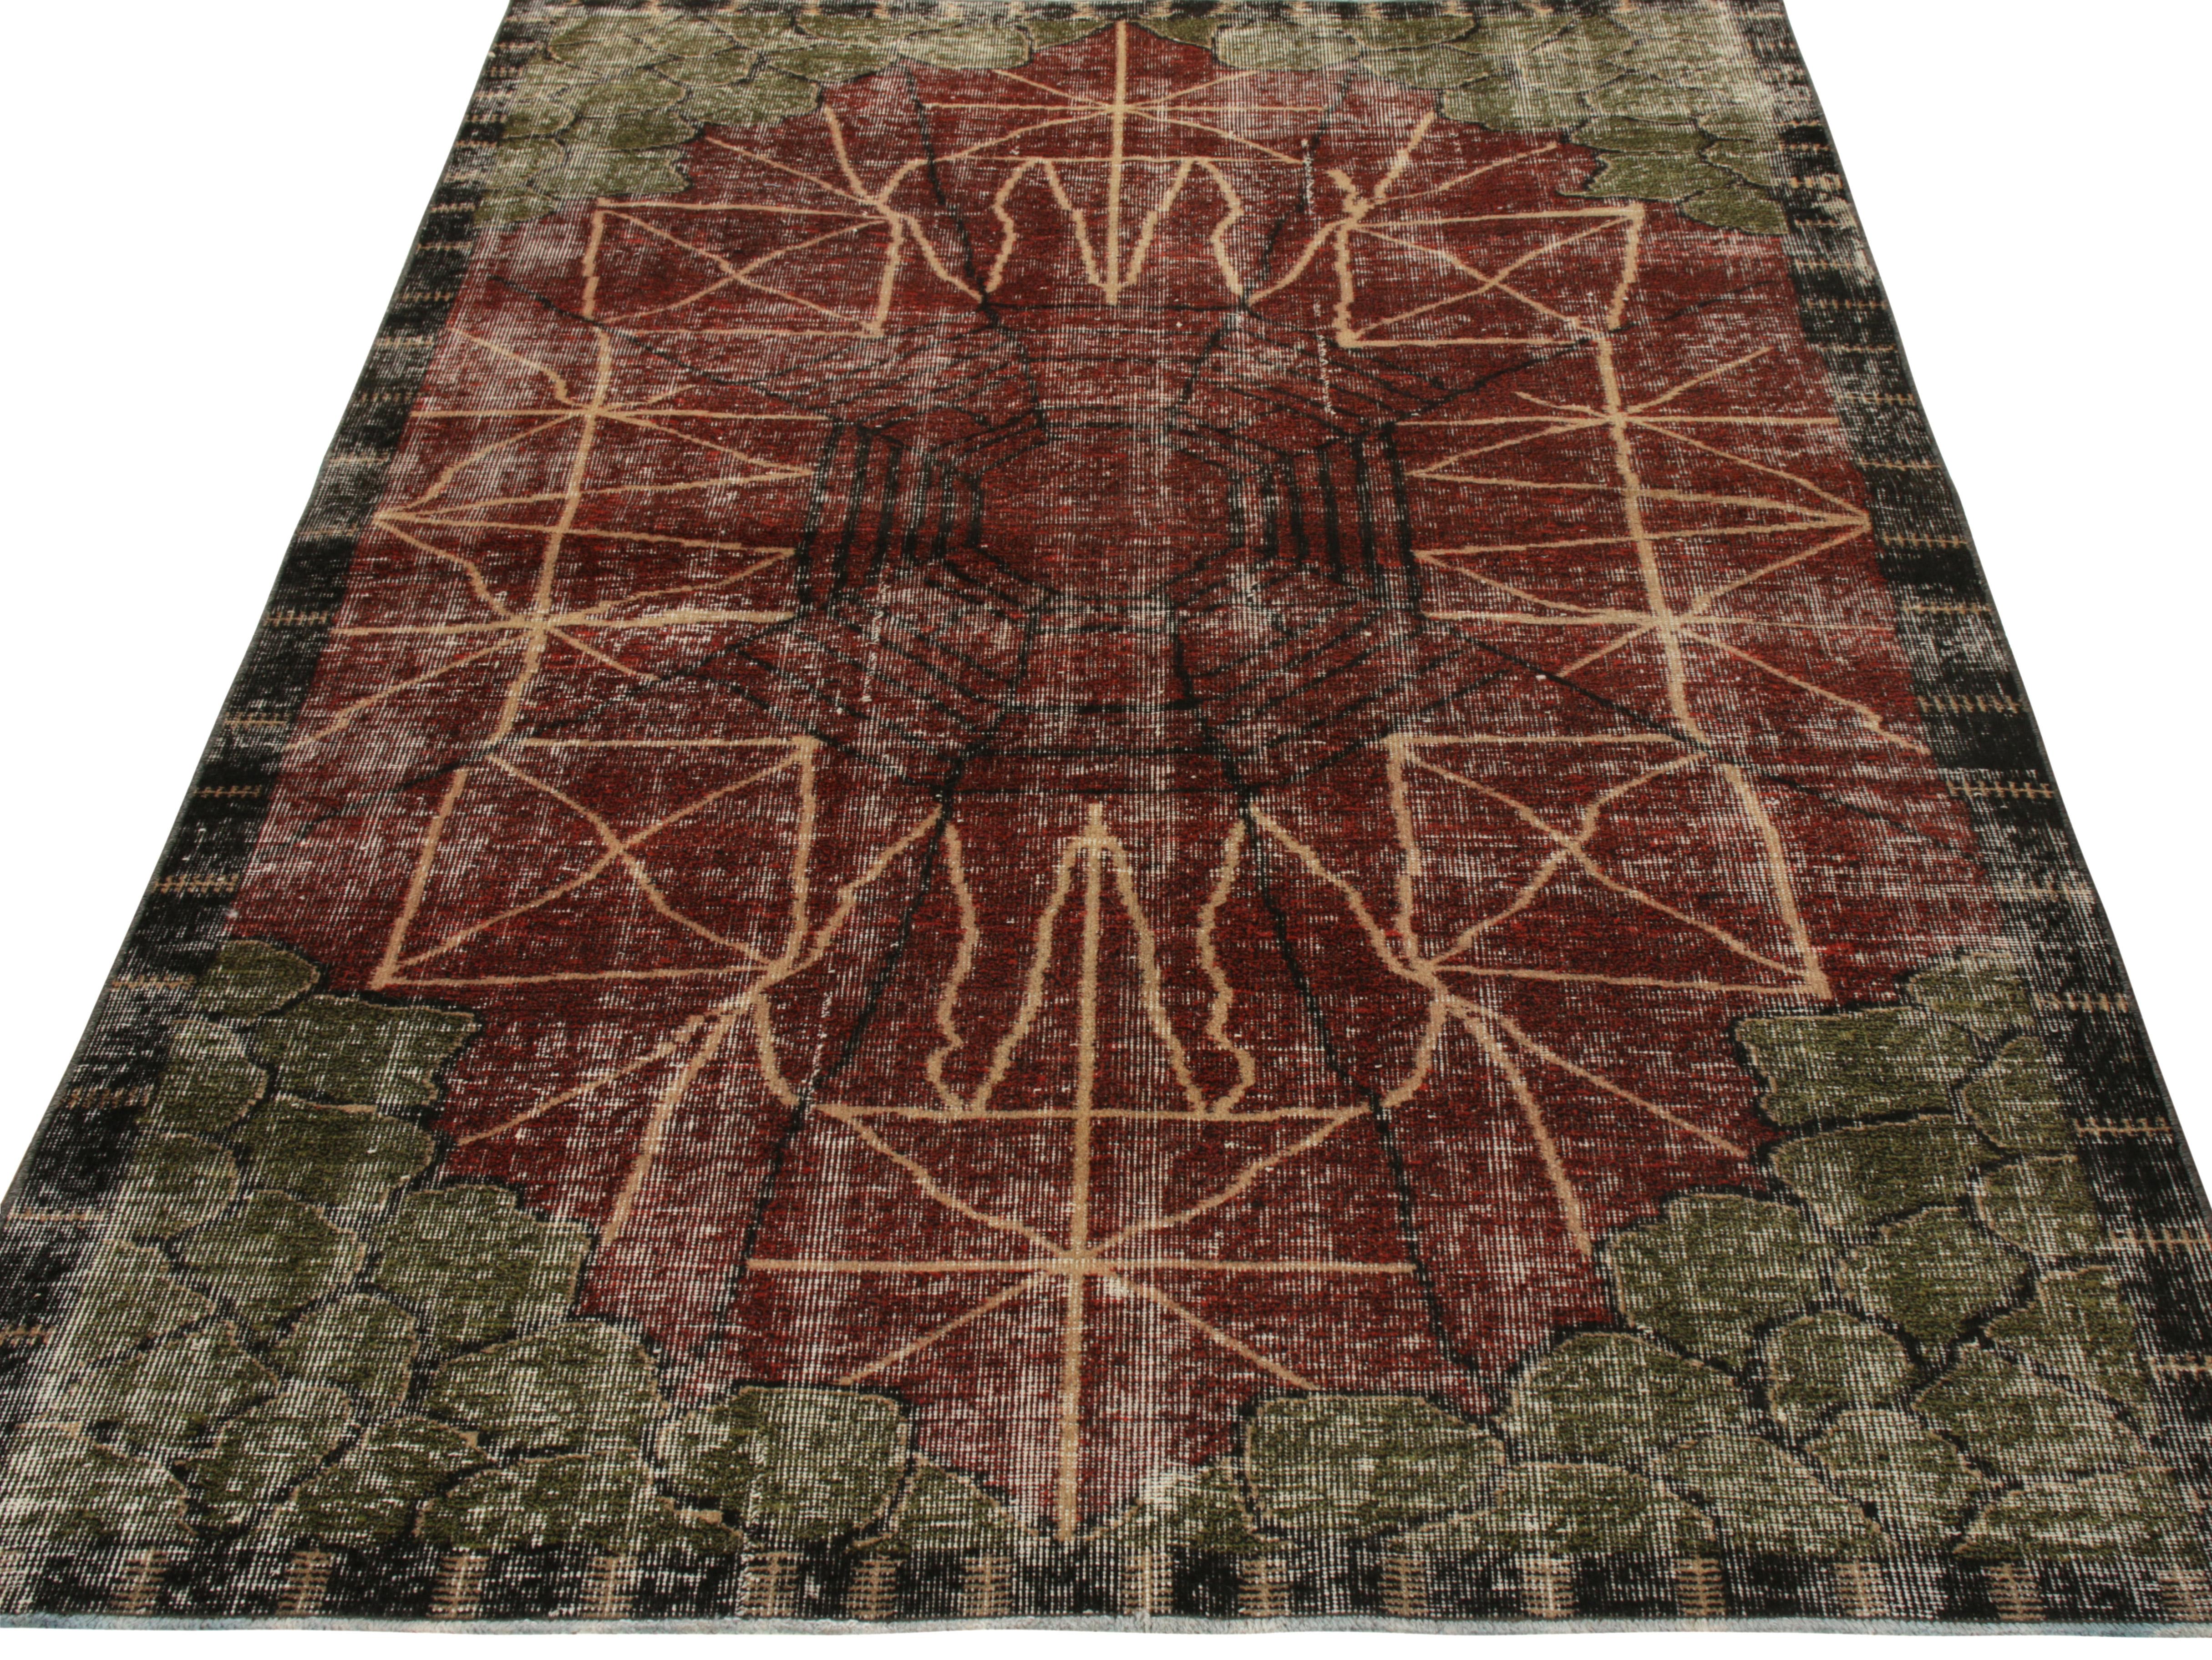 Hand-knotted in woo from Turkey circa 1960-1960l, a 5x8 Mid-Century Modern rug in Art Deco style from Rug & Kilim’s growing Mid-Century Pasha Collection. Featuring a well defined geometric pattern in peach and black on a red and green backdrop, the